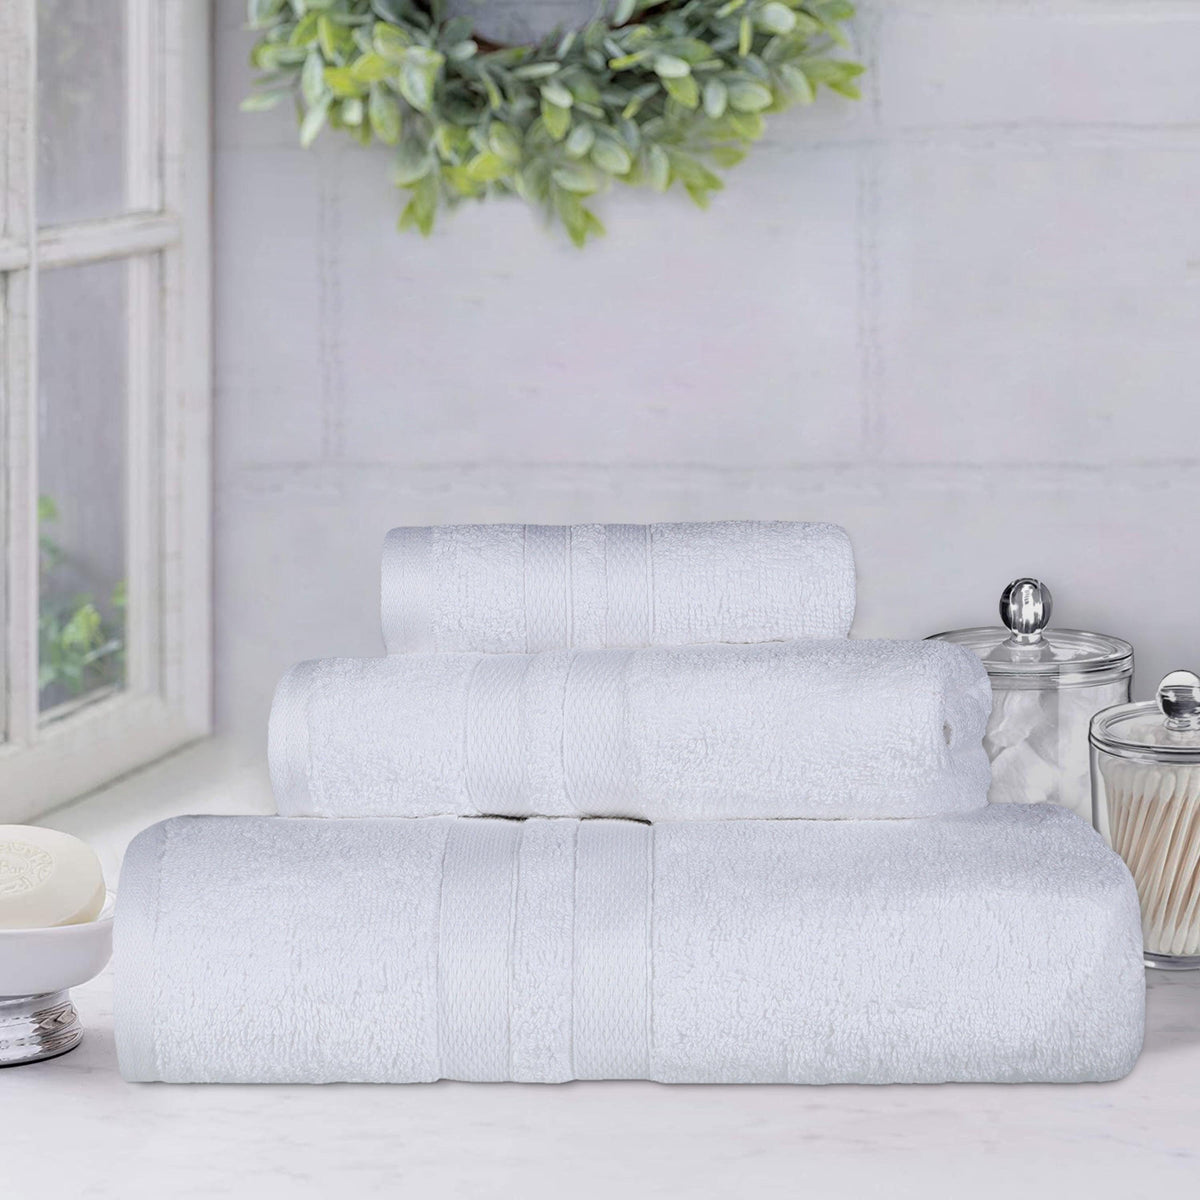 Superior Ultra Soft Cotton Absorbent Solid Assorted 3-Piece Towel Set - White